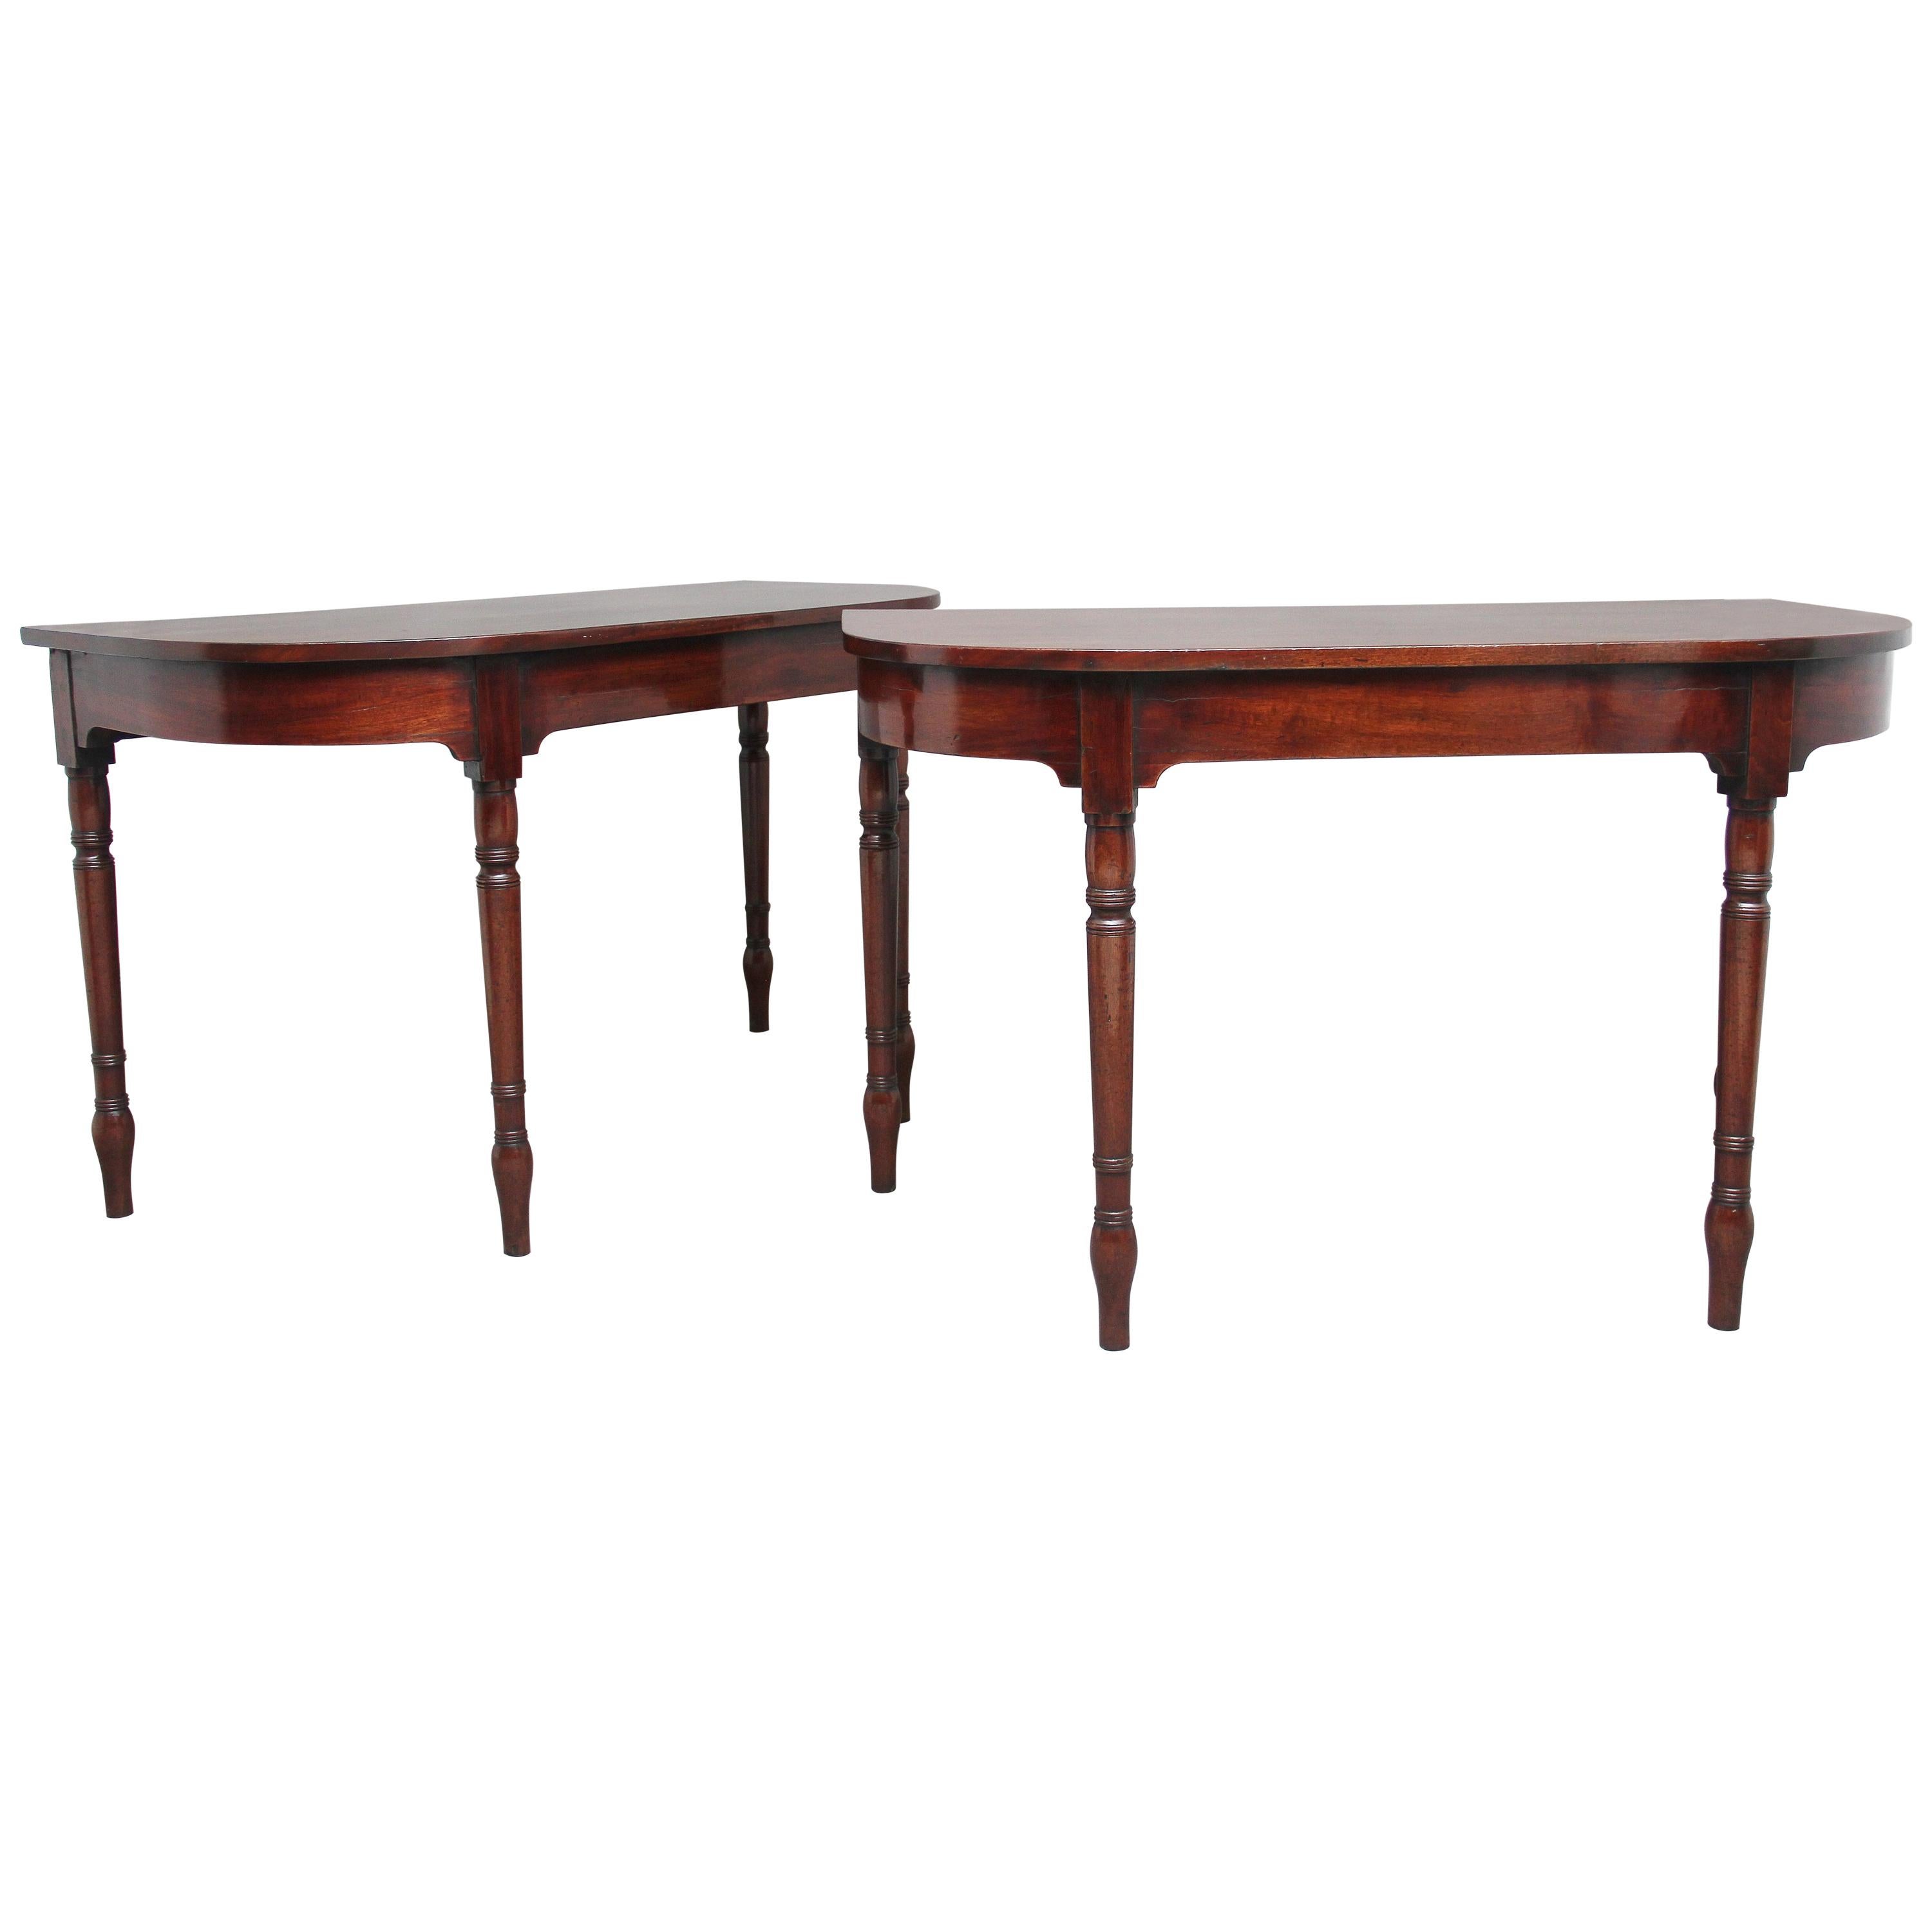 Pair of Early 19th Century Mahogany Console Tables